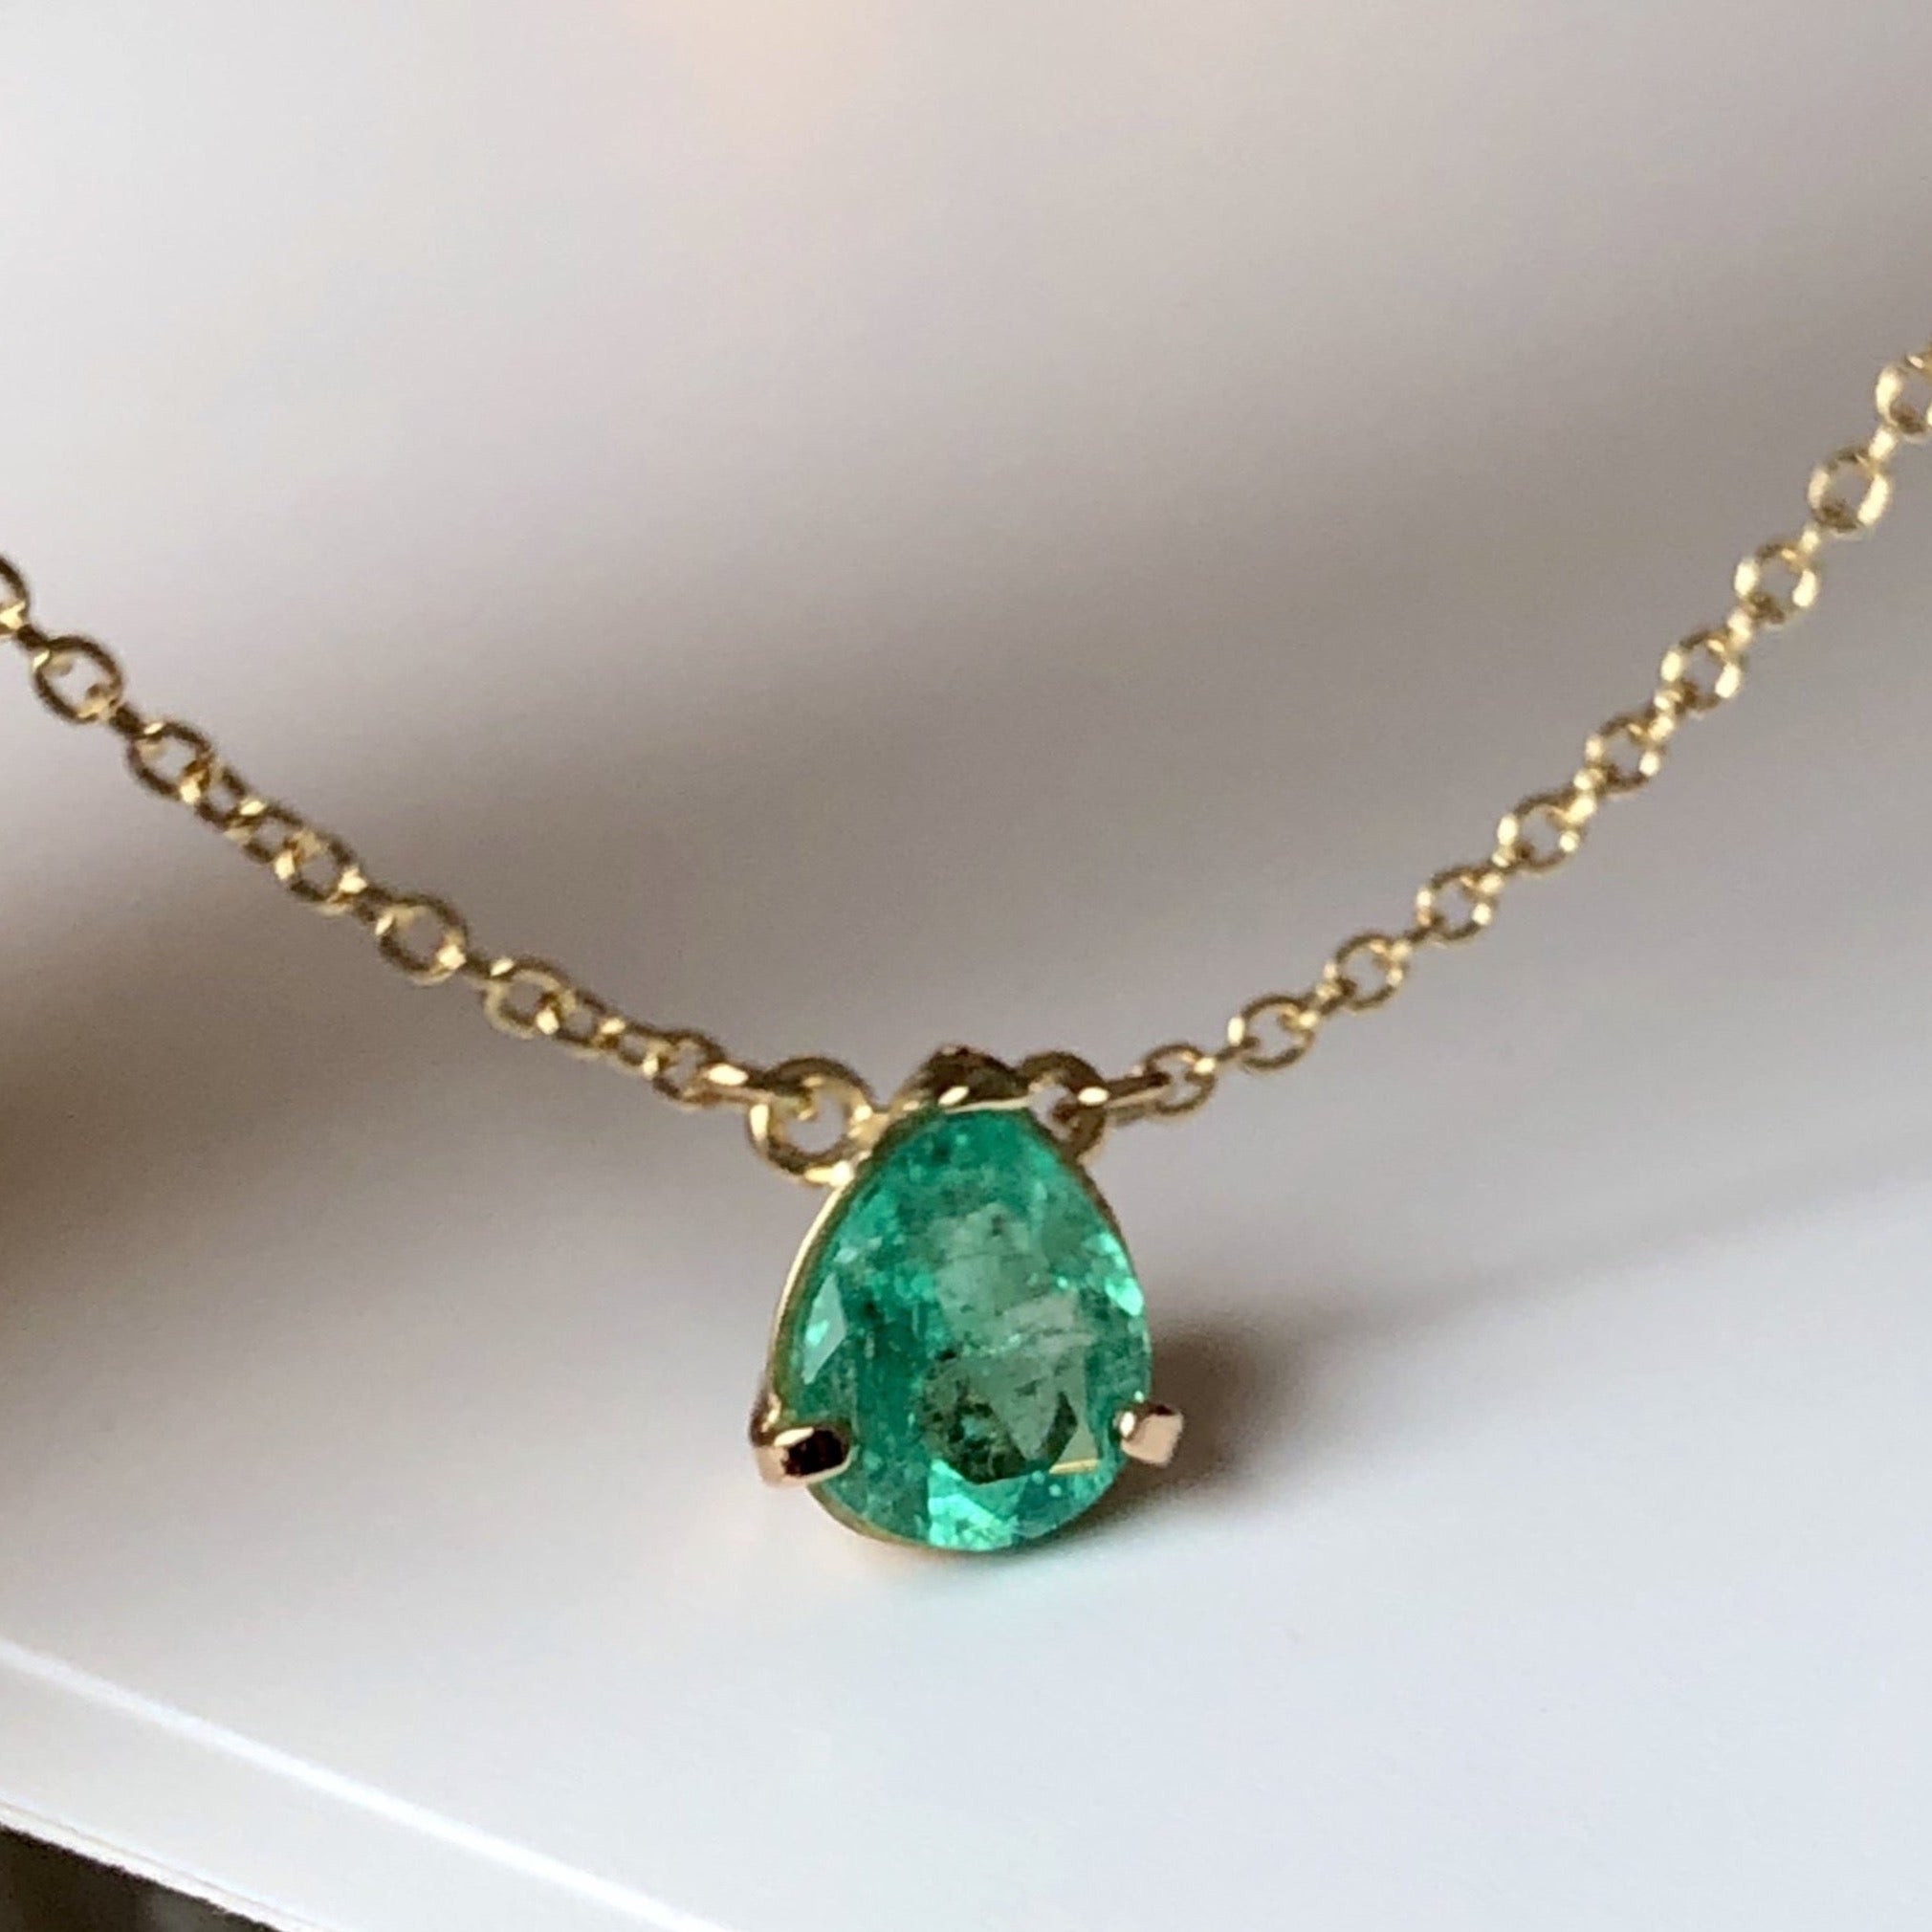 Luxury Jewellery: House of Roses 115-Carat Colombian Emerald Necklace |  Jewellery